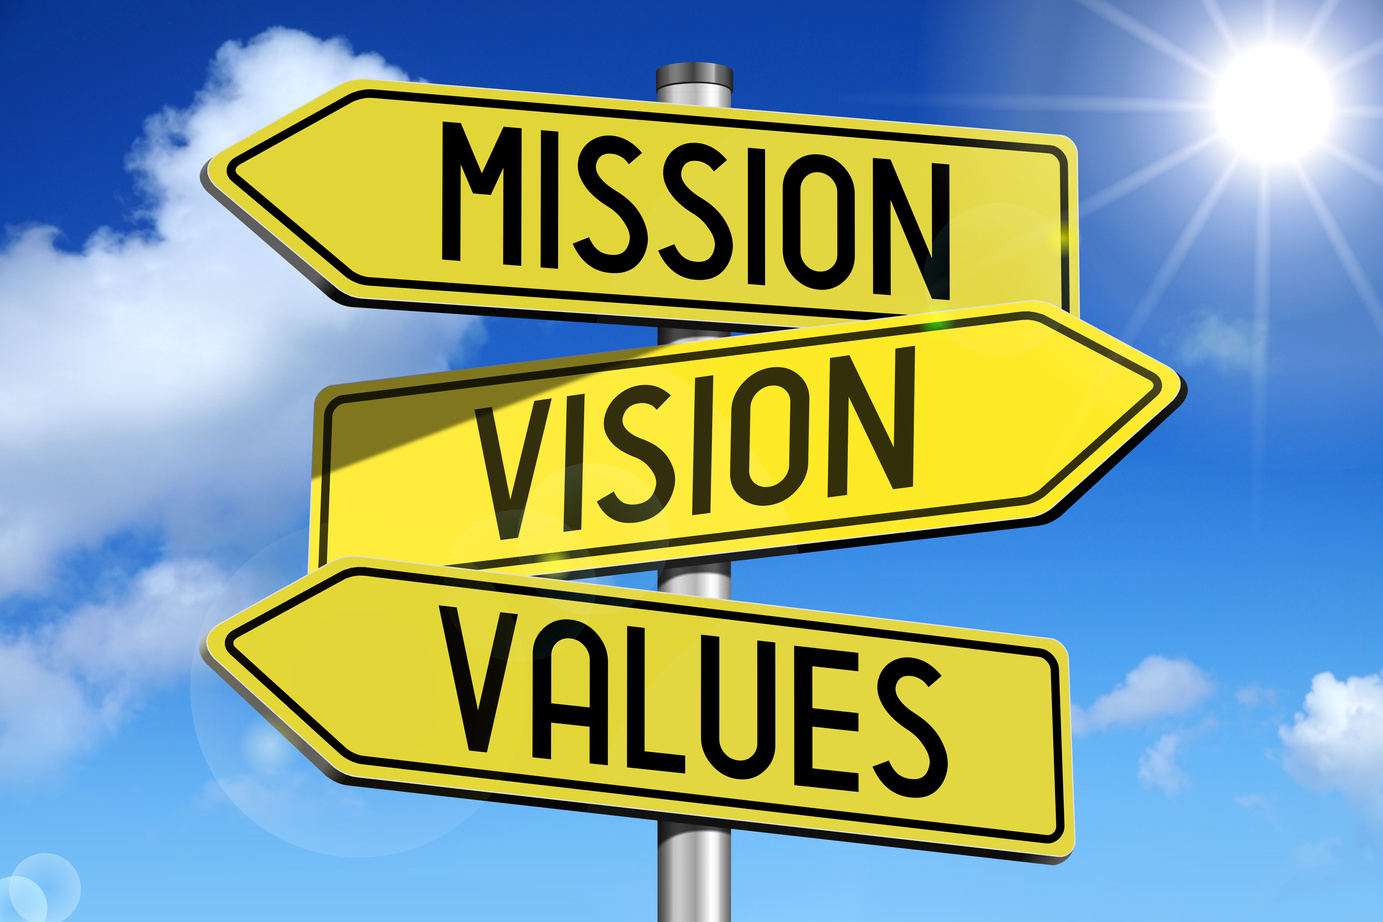 Mission, vision, values - yellow roadsign